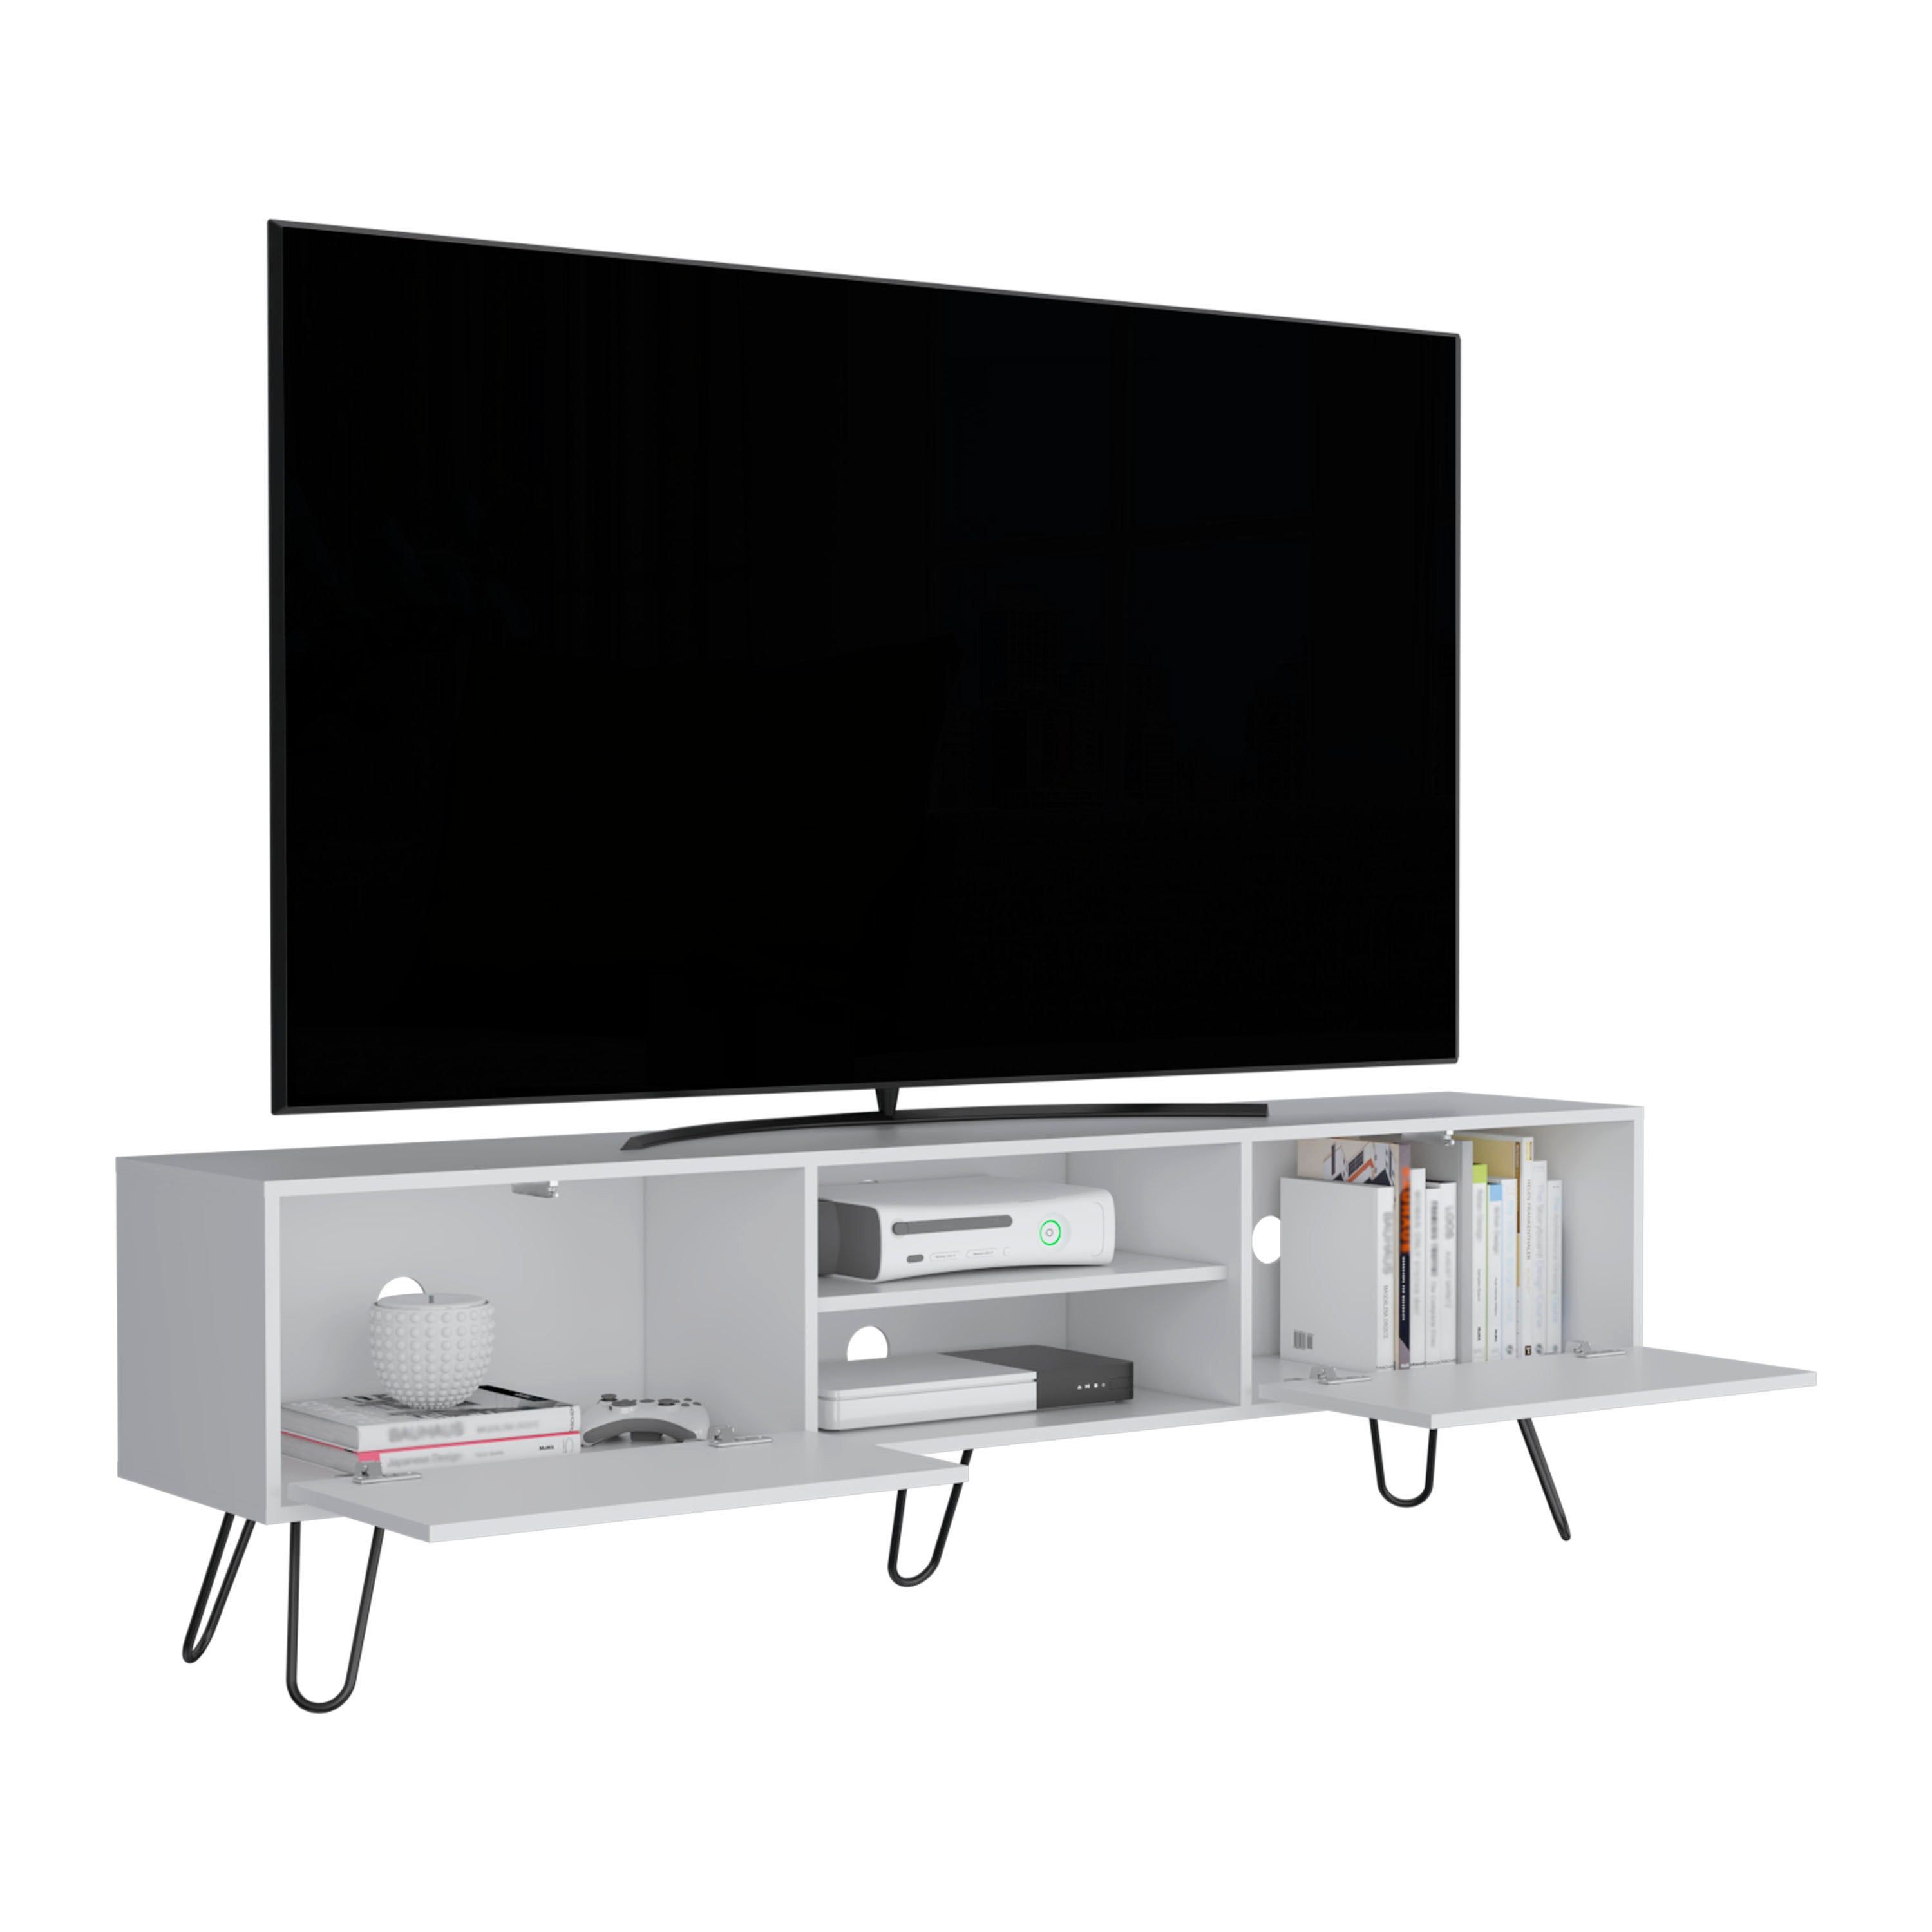 TV Stand, Entertainment Unit with Hinged Drawers and Hairpin Legs